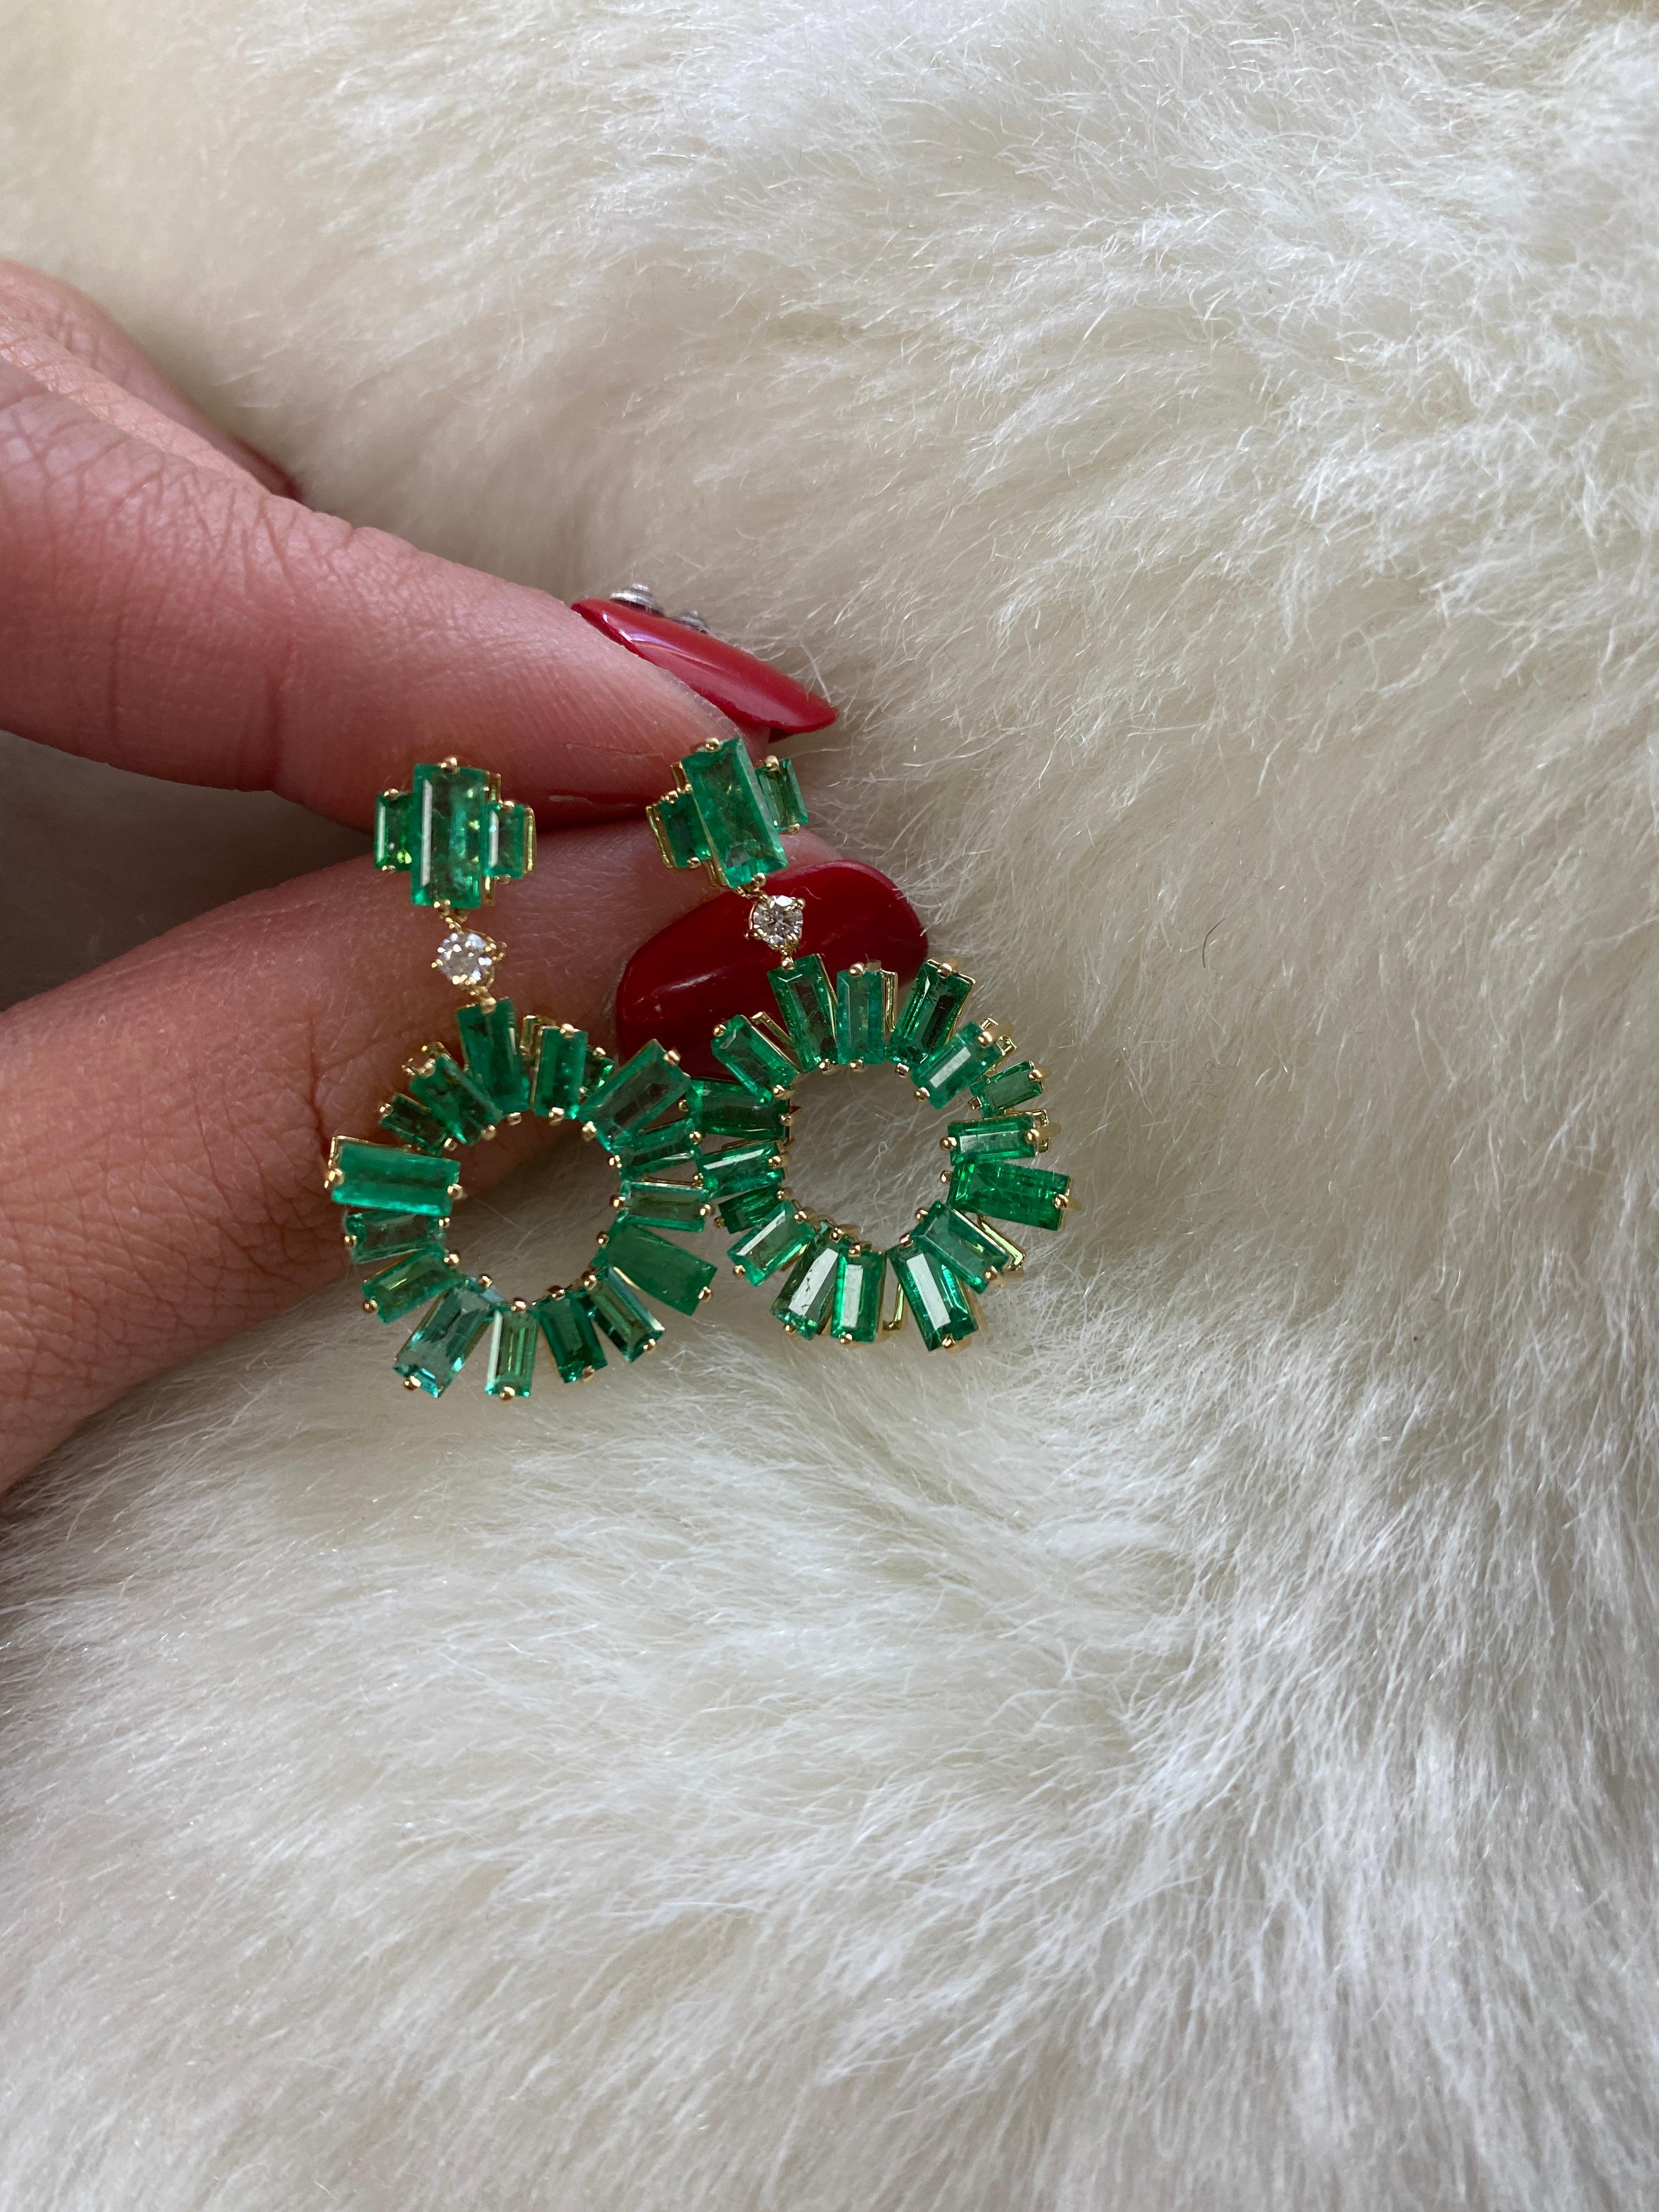 These Emerald Fancy Baguettes Earrings with Diamonds from the 'G-One' Collection are a stunning addition to any jewelry collection. Made of 18K yellow gold, these earrings feature beautiful emerald baguettes and diamonds that are delicately set to